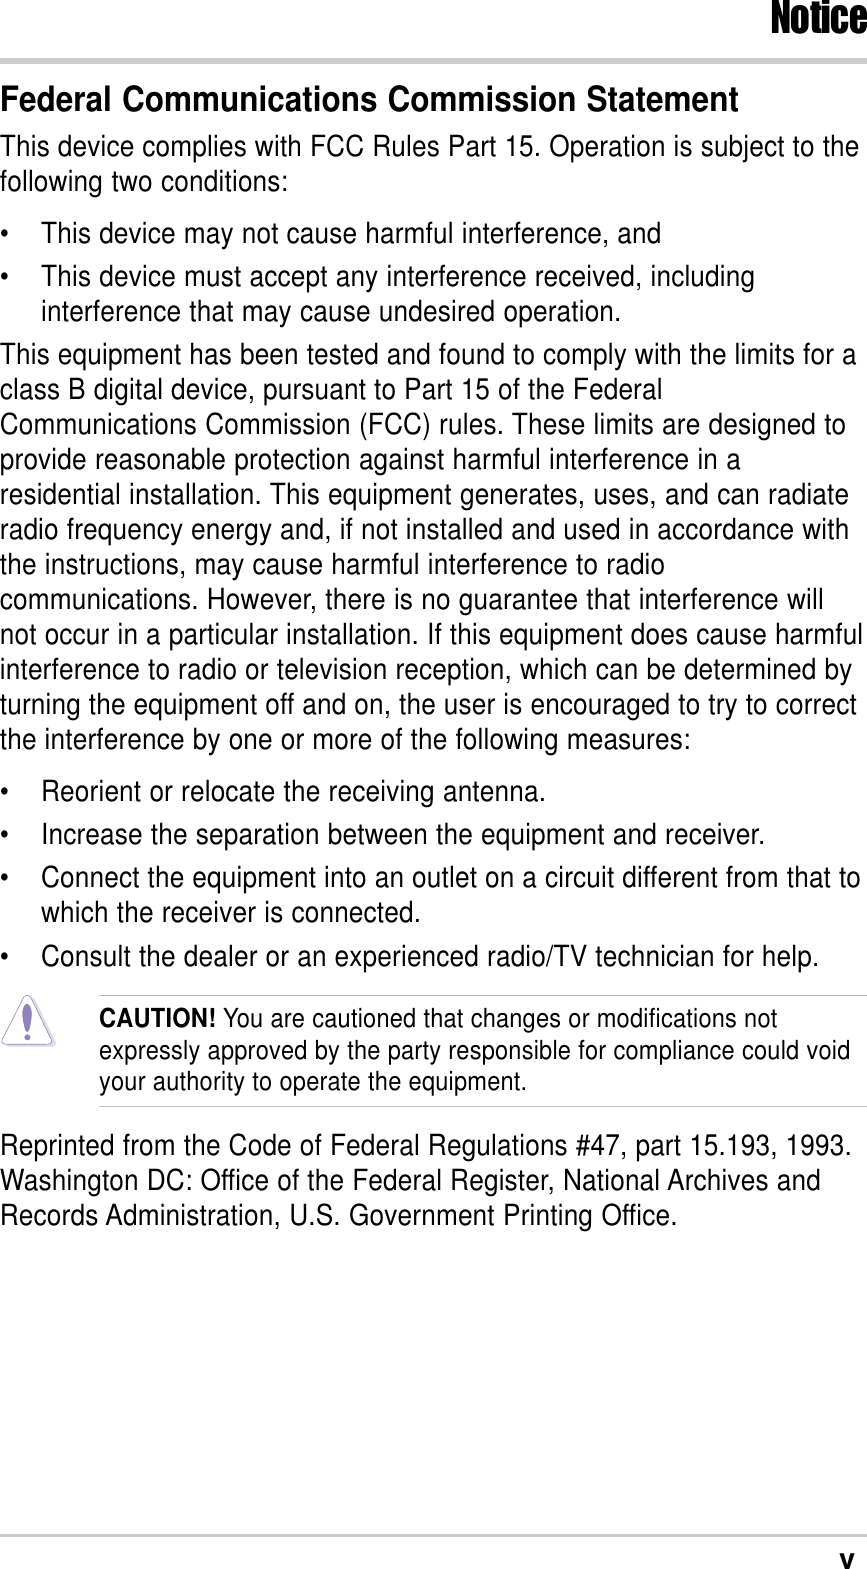 vFederal Communications Commission StatementThis device complies with FCC Rules Part 15. Operation is subject to thefollowing two conditions:•This device may not cause harmful interference, and•This device must accept any interference received, includinginterference that may cause undesired operation.This equipment has been tested and found to comply with the limits for aclass B digital device, pursuant to Part 15 of the FederalCommunications Commission (FCC) rules. These limits are designed toprovide reasonable protection against harmful interference in aresidential installation. This equipment generates, uses, and can radiateradio frequency energy and, if not installed and used in accordance withthe instructions, may cause harmful interference to radiocommunications. However, there is no guarantee that interference willnot occur in a particular installation. If this equipment does cause harmfulinterference to radio or television reception, which can be determined byturning the equipment off and on, the user is encouraged to try to correctthe interference by one or more of the following measures:•Reorient or relocate the receiving antenna.•Increase the separation between the equipment and receiver.•Connect the equipment into an outlet on a circuit different from that towhich the receiver is connected.•Consult the dealer or an experienced radio/TV technician for help.CAUTION! You are cautioned that changes or modifications notexpressly approved by the party responsible for compliance could voidyour authority to operate the equipment.Reprinted from the Code of Federal Regulations #47, part 15.193, 1993.Washington DC: Office of the Federal Register, National Archives andRecords Administration, U.S. Government Printing Office.Notice